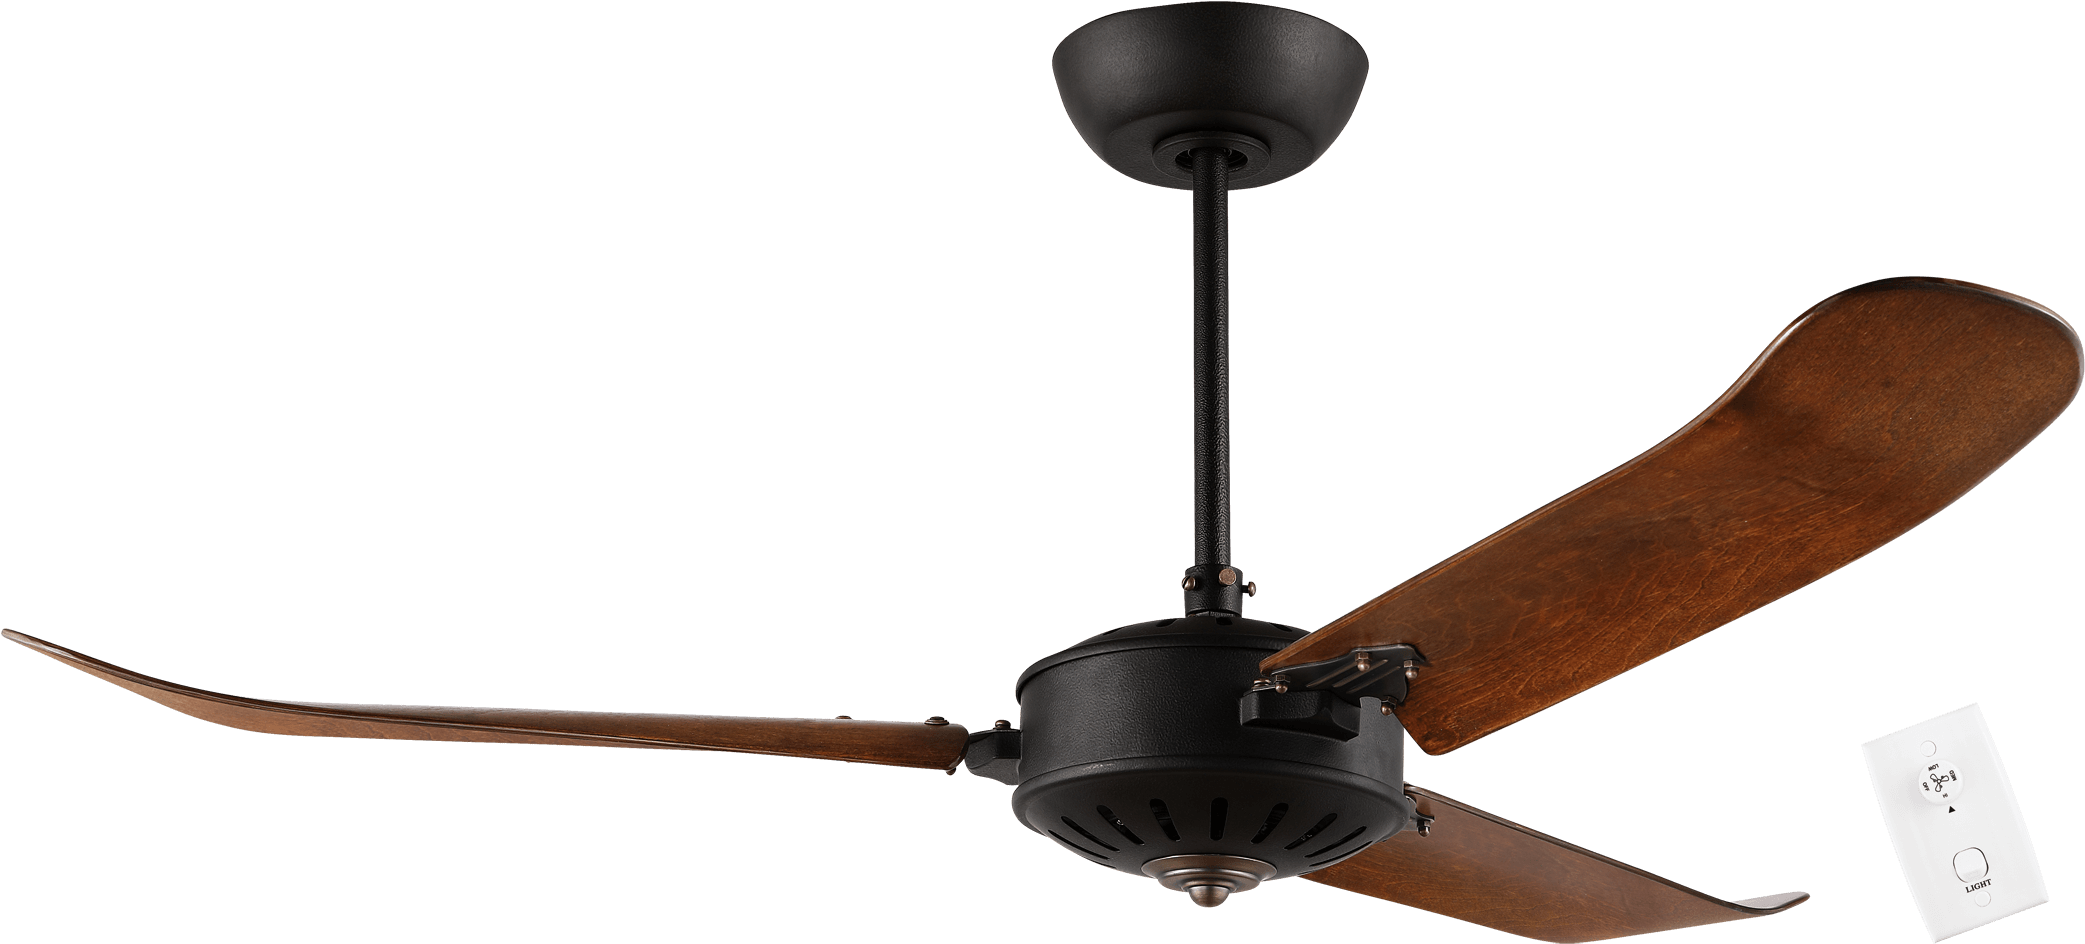 This Eglo Ceiling Fan Comes With A Manufacturer's Warranty - Ceiling Fan (2500x2500), Png Download